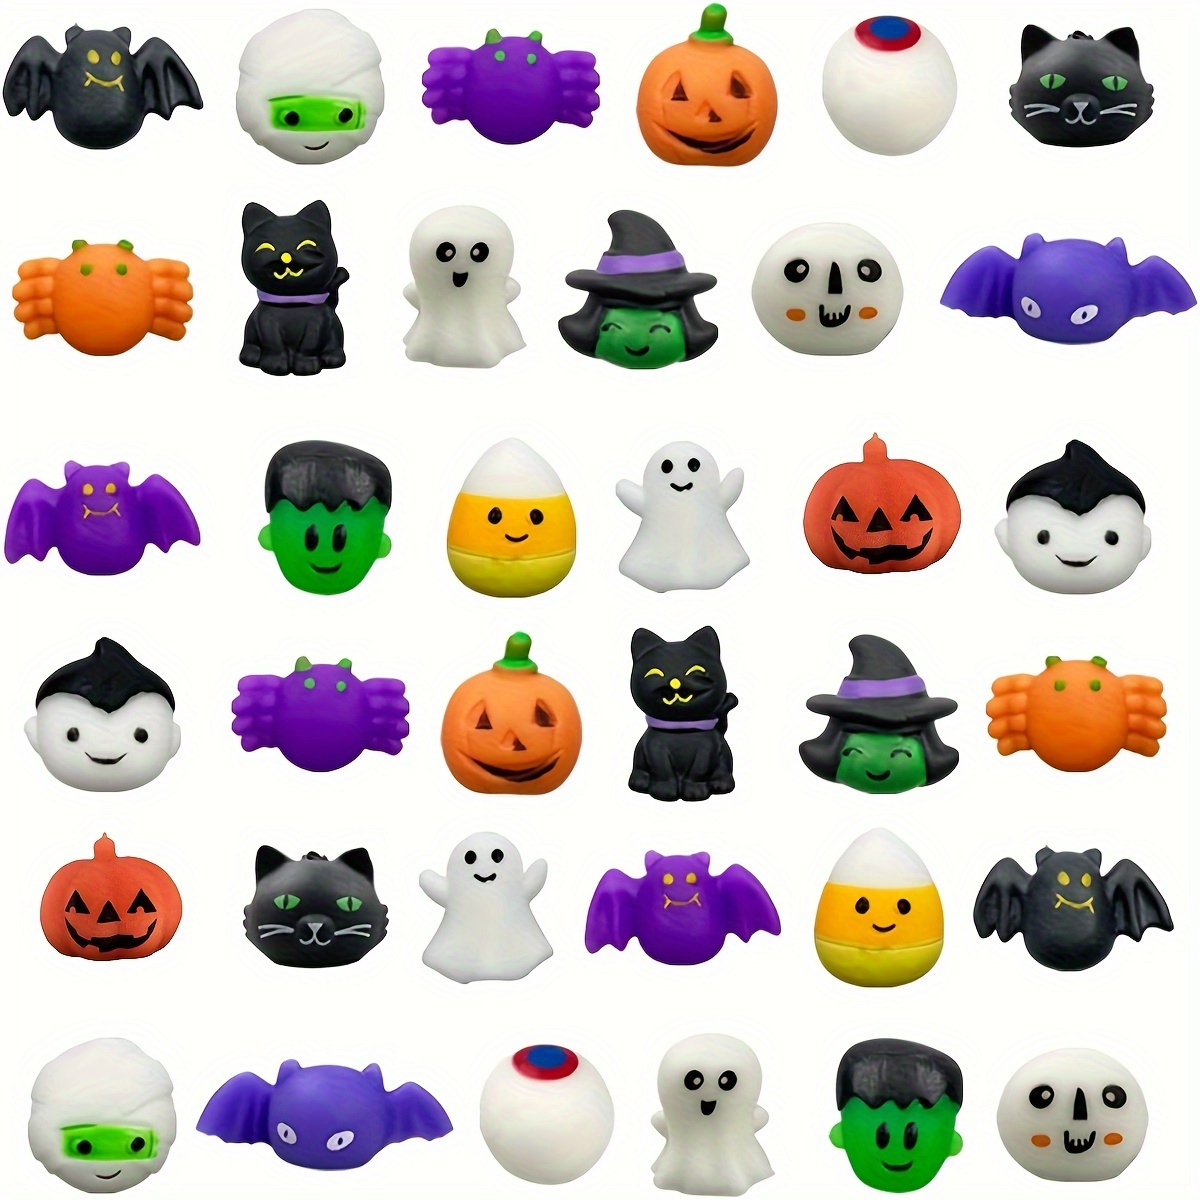 

Halloween Squishy Toy Set - 18/36pcs Assorted Styles | Soft Thermoplastic Rubber Toys | Perfect For Kids' Party Favors & Treat Bag Fillers | Ages 3-12